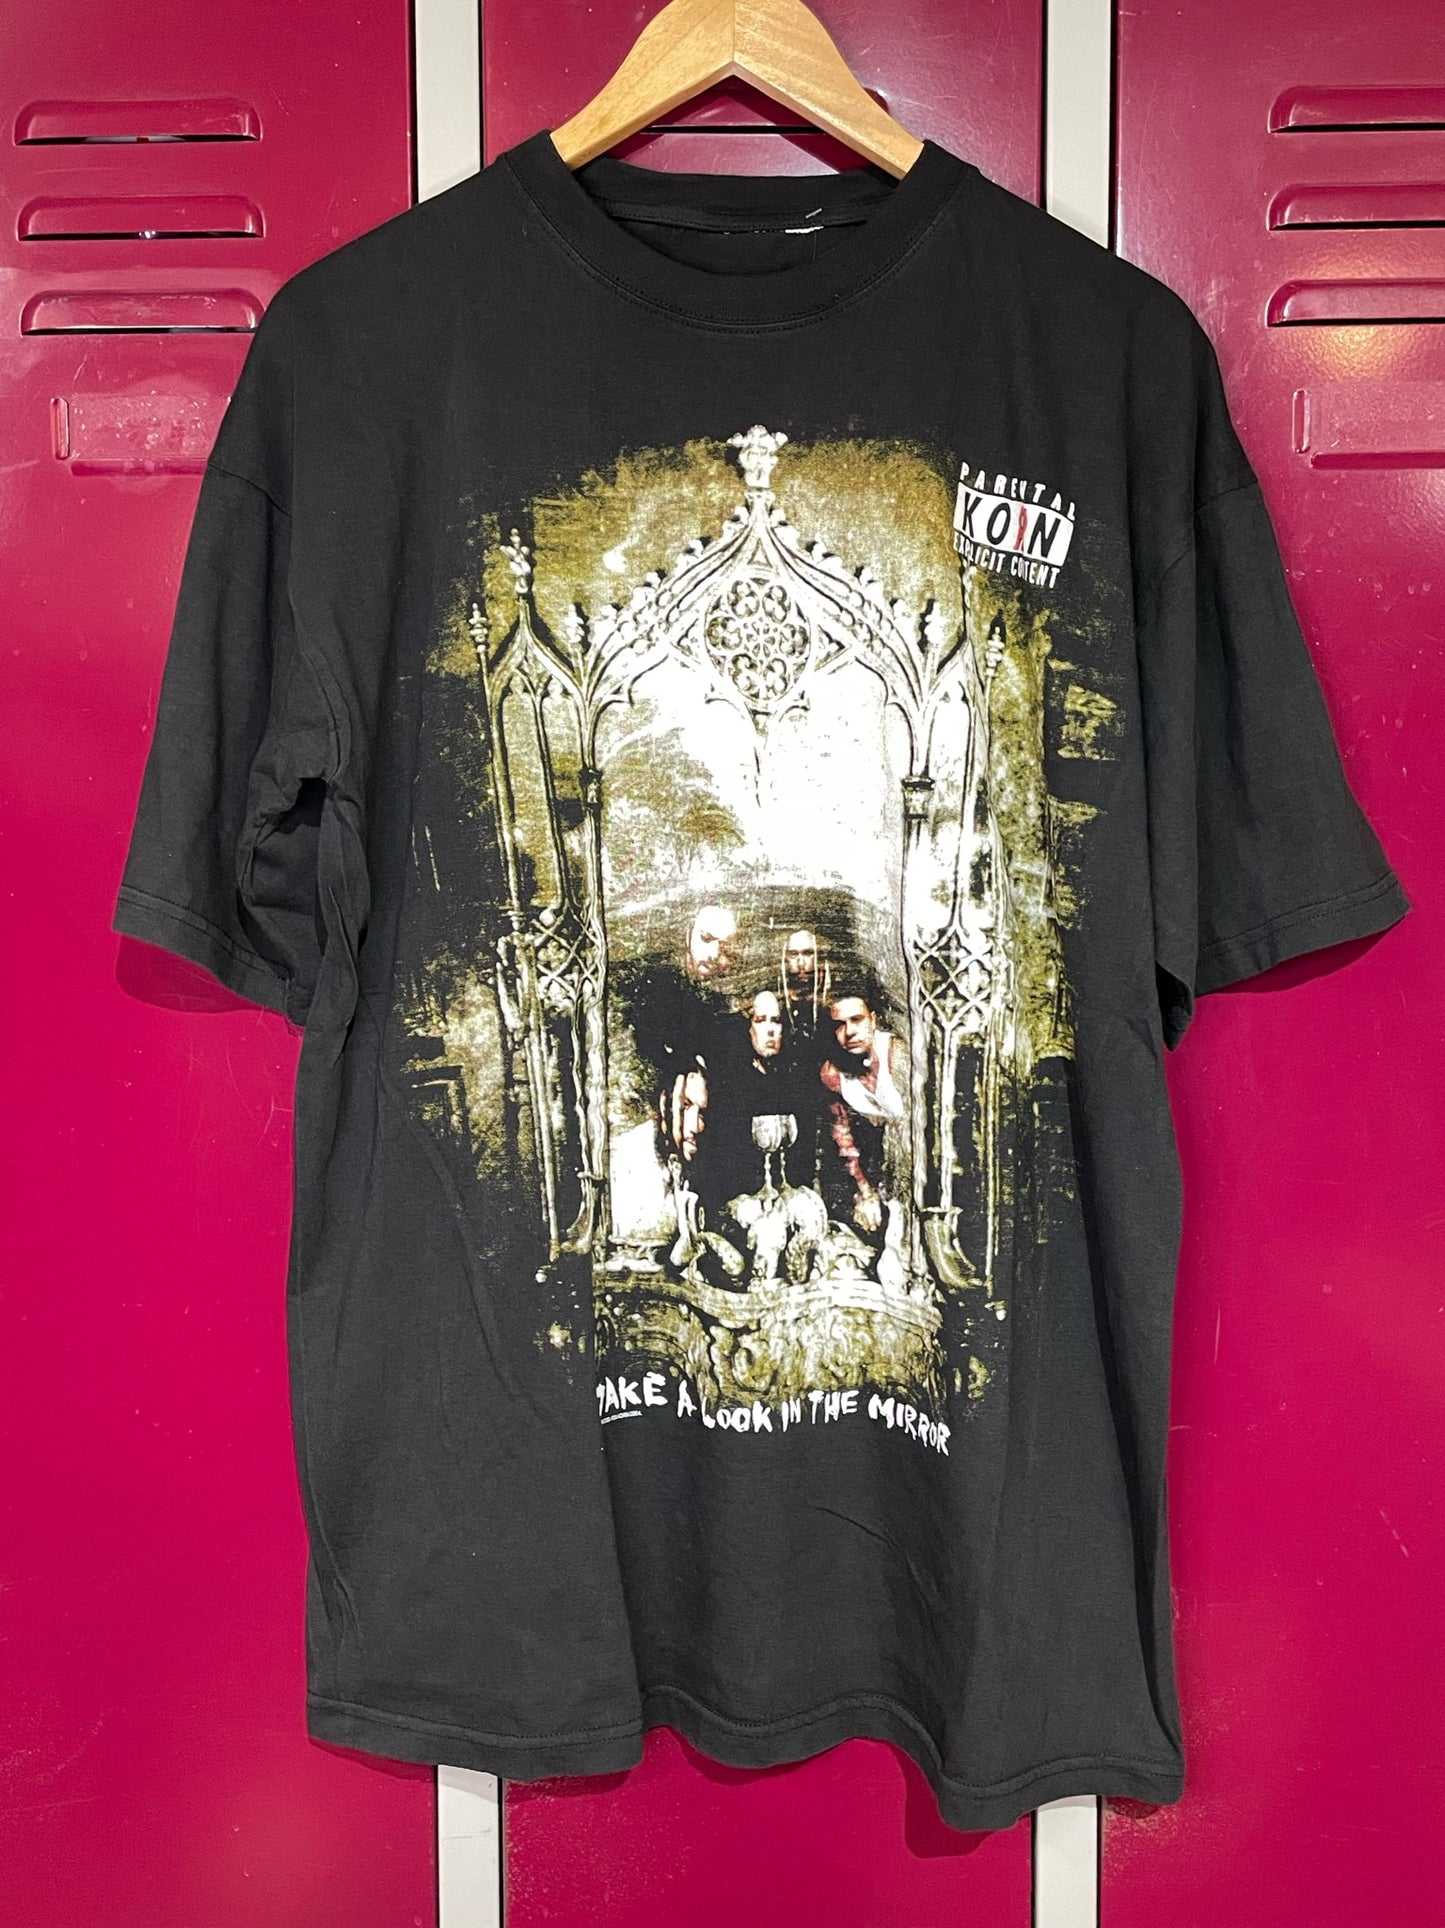 KORN "TAKE A LOOK IN THE MIRROR" 2004 MUSIC BAND T-SHIRT  SZ: XL